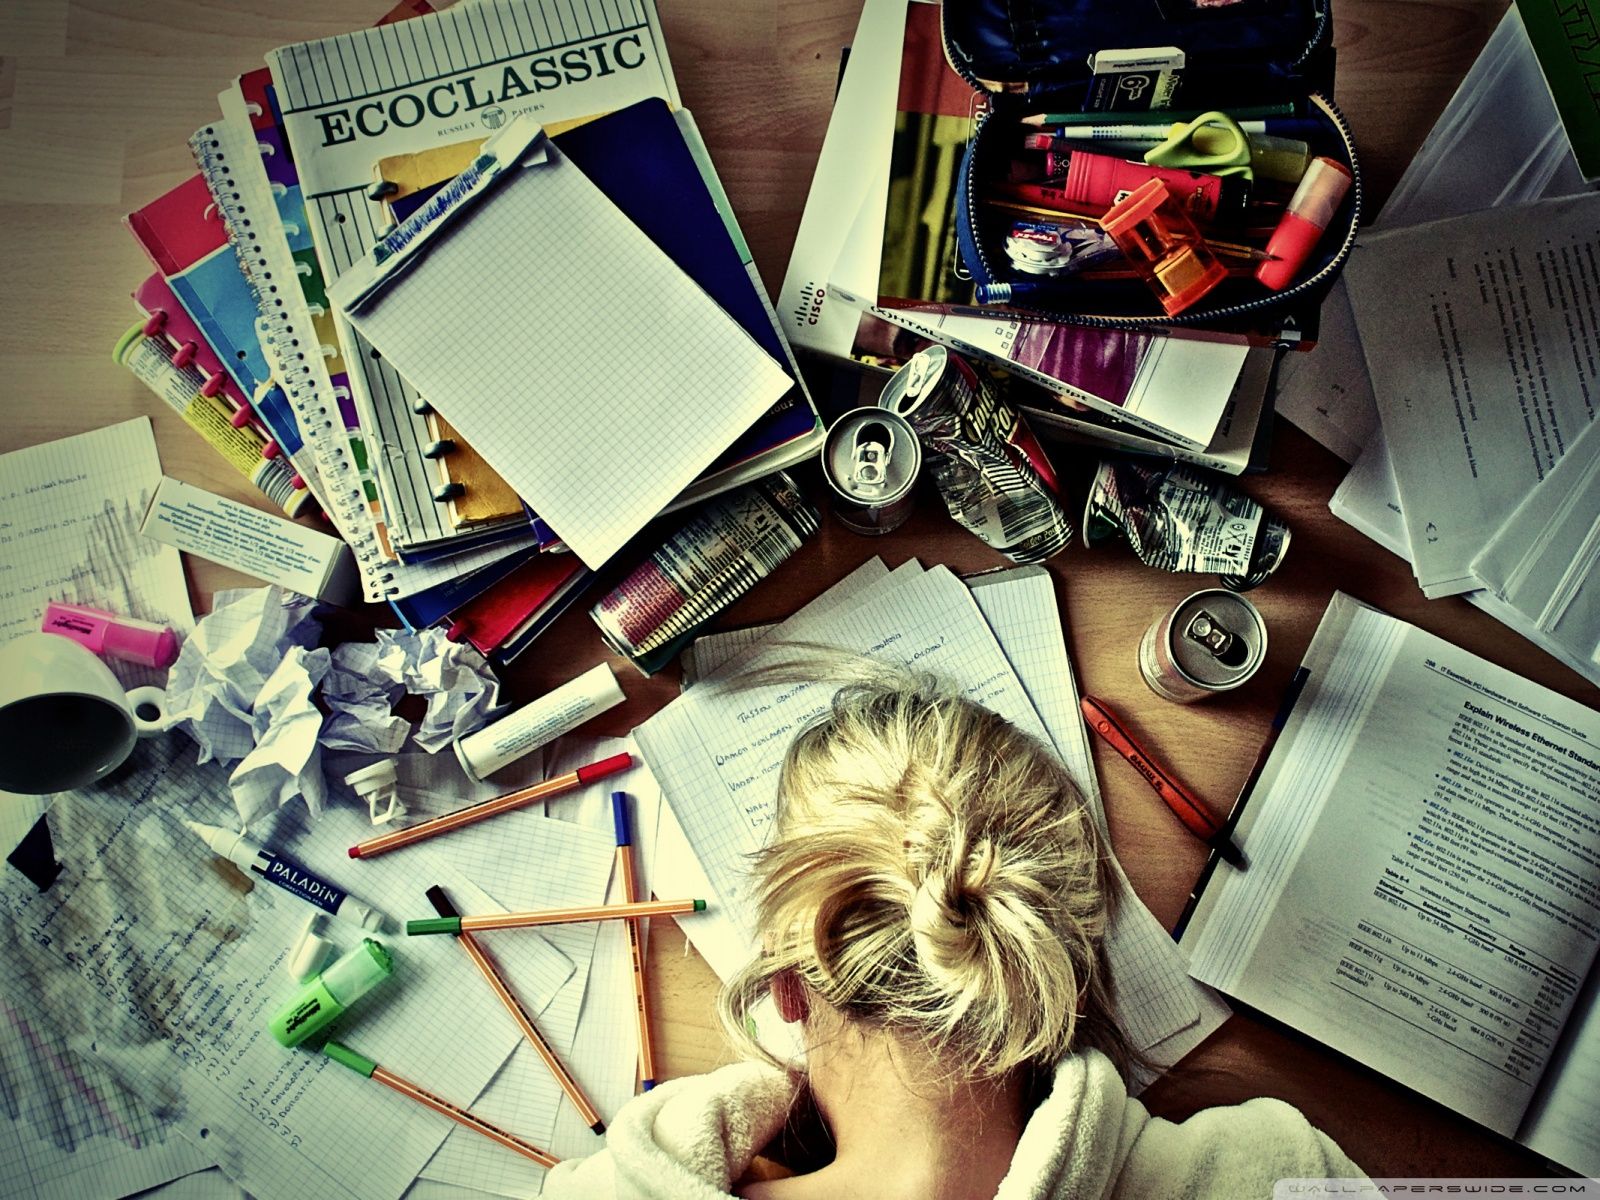 A woman with her head in her hands sitting at a cluttered desk - Study